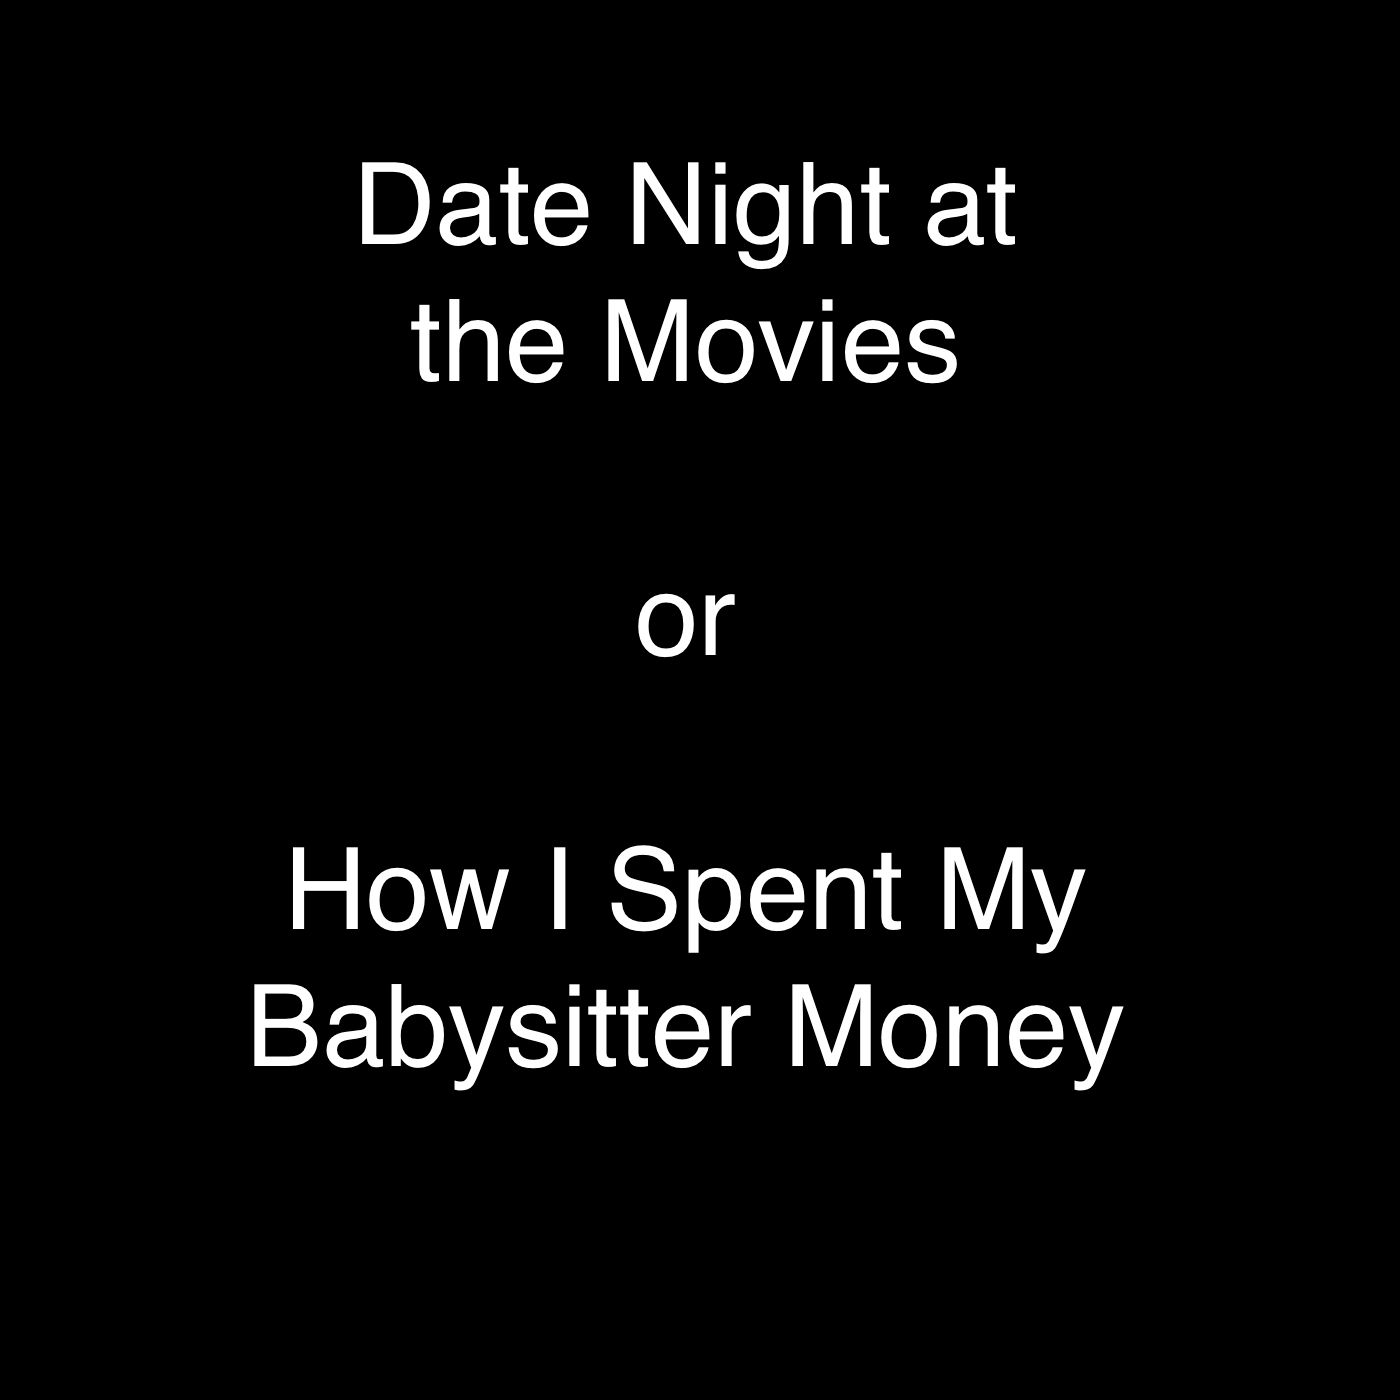 Date Night at the Movies or How I Spent My Babysitter Money